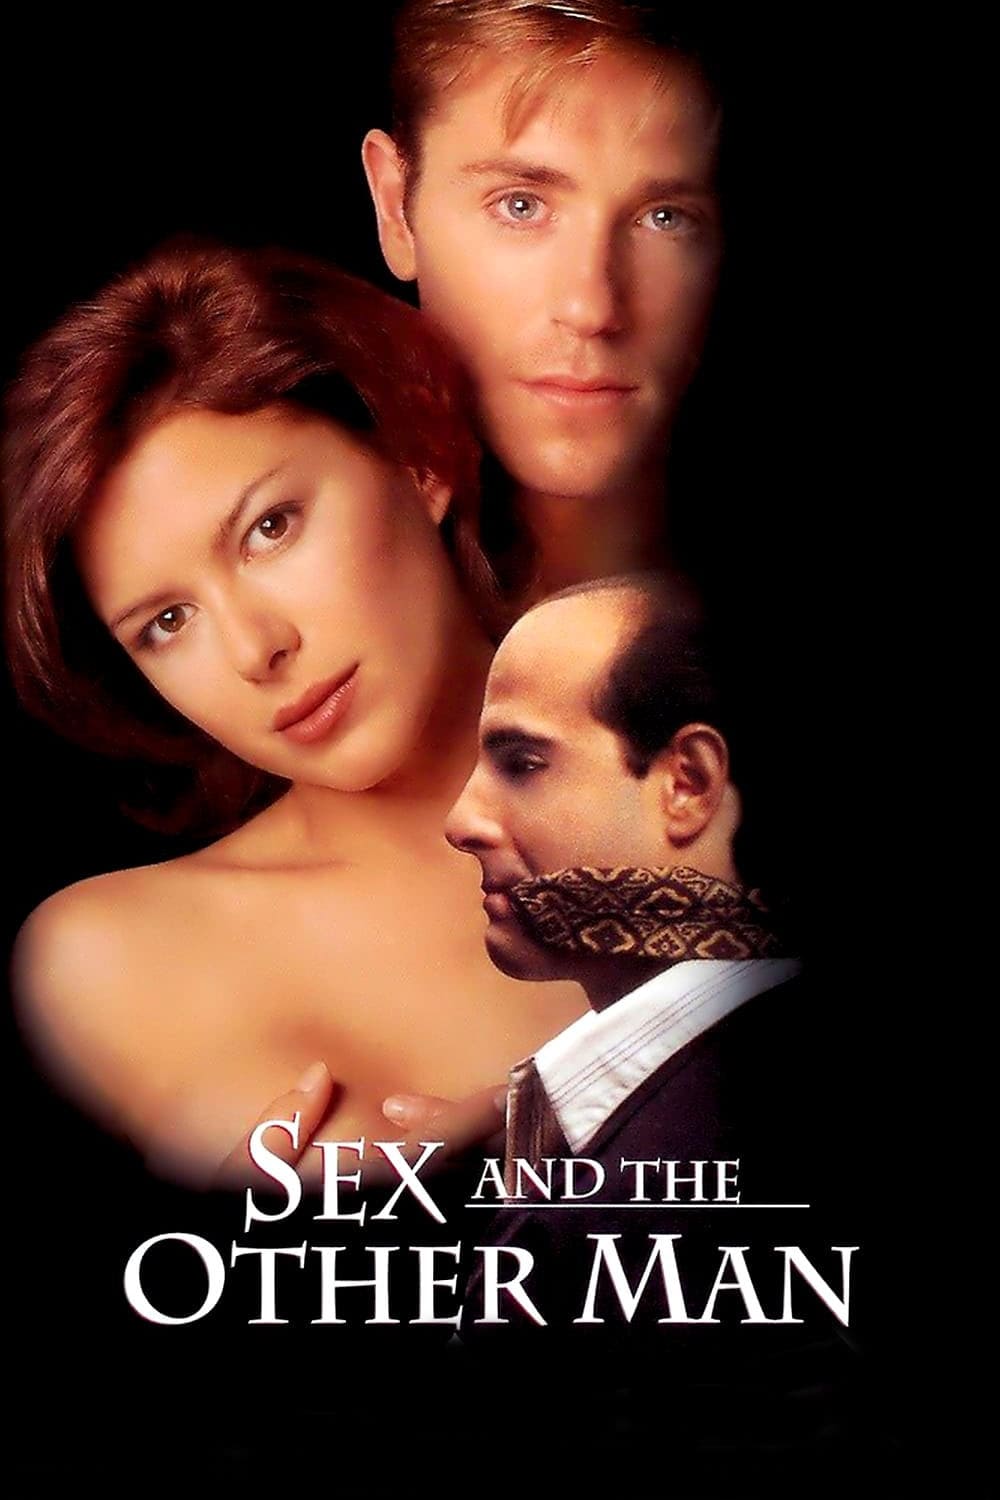 Sex and the Other Man (1995) picture image